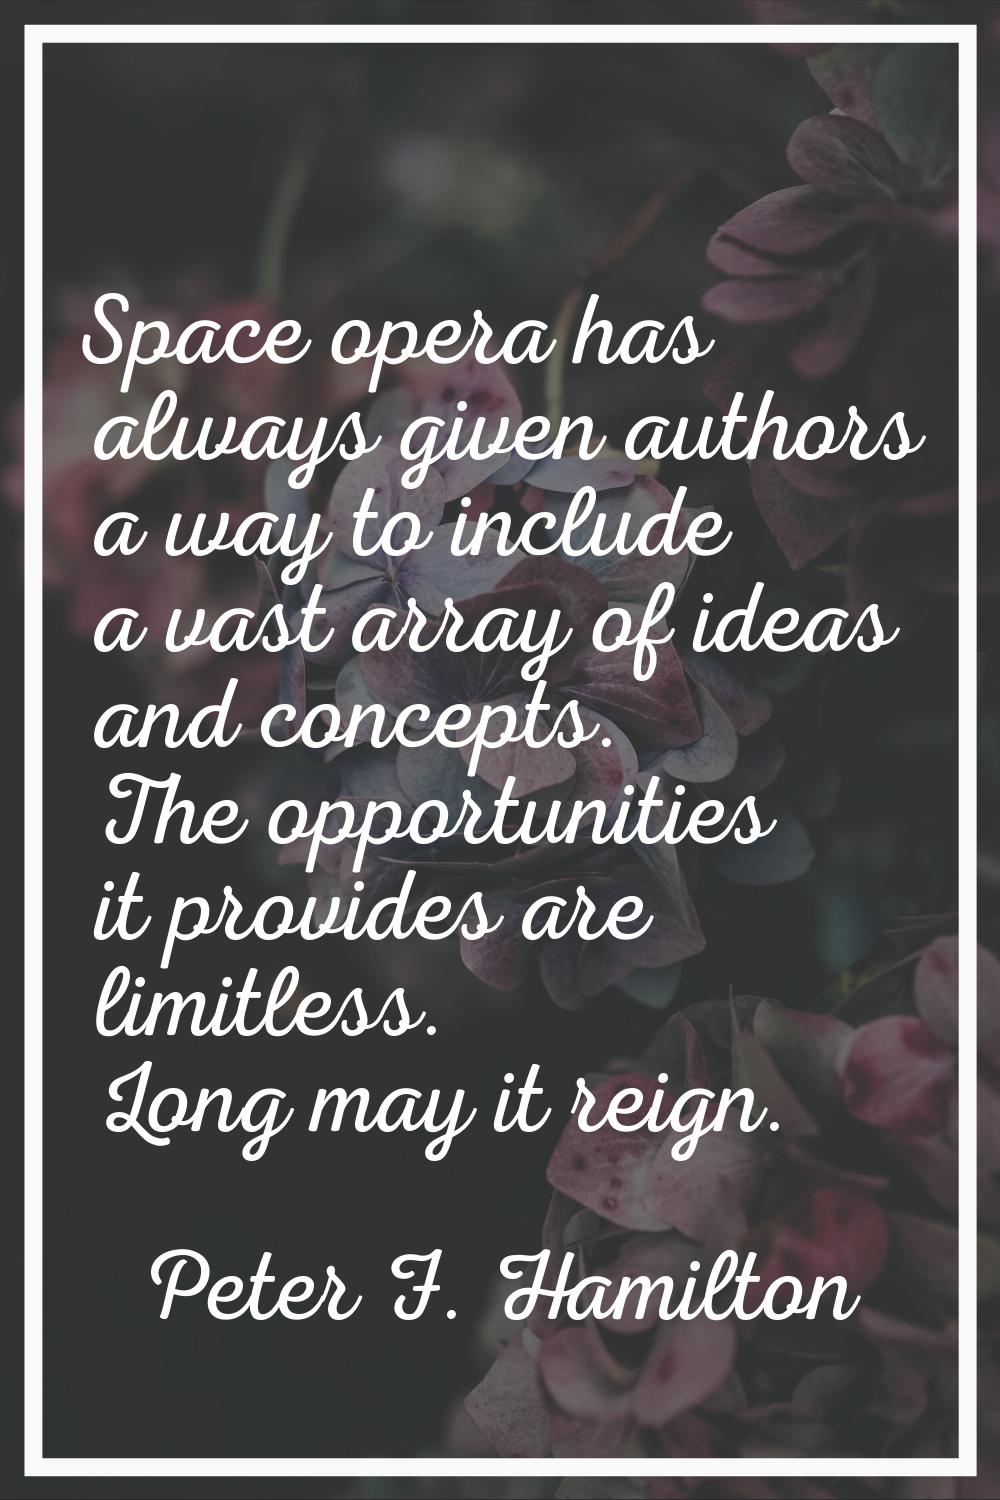 Space opera has always given authors a way to include a vast array of ideas and concepts. The oppor